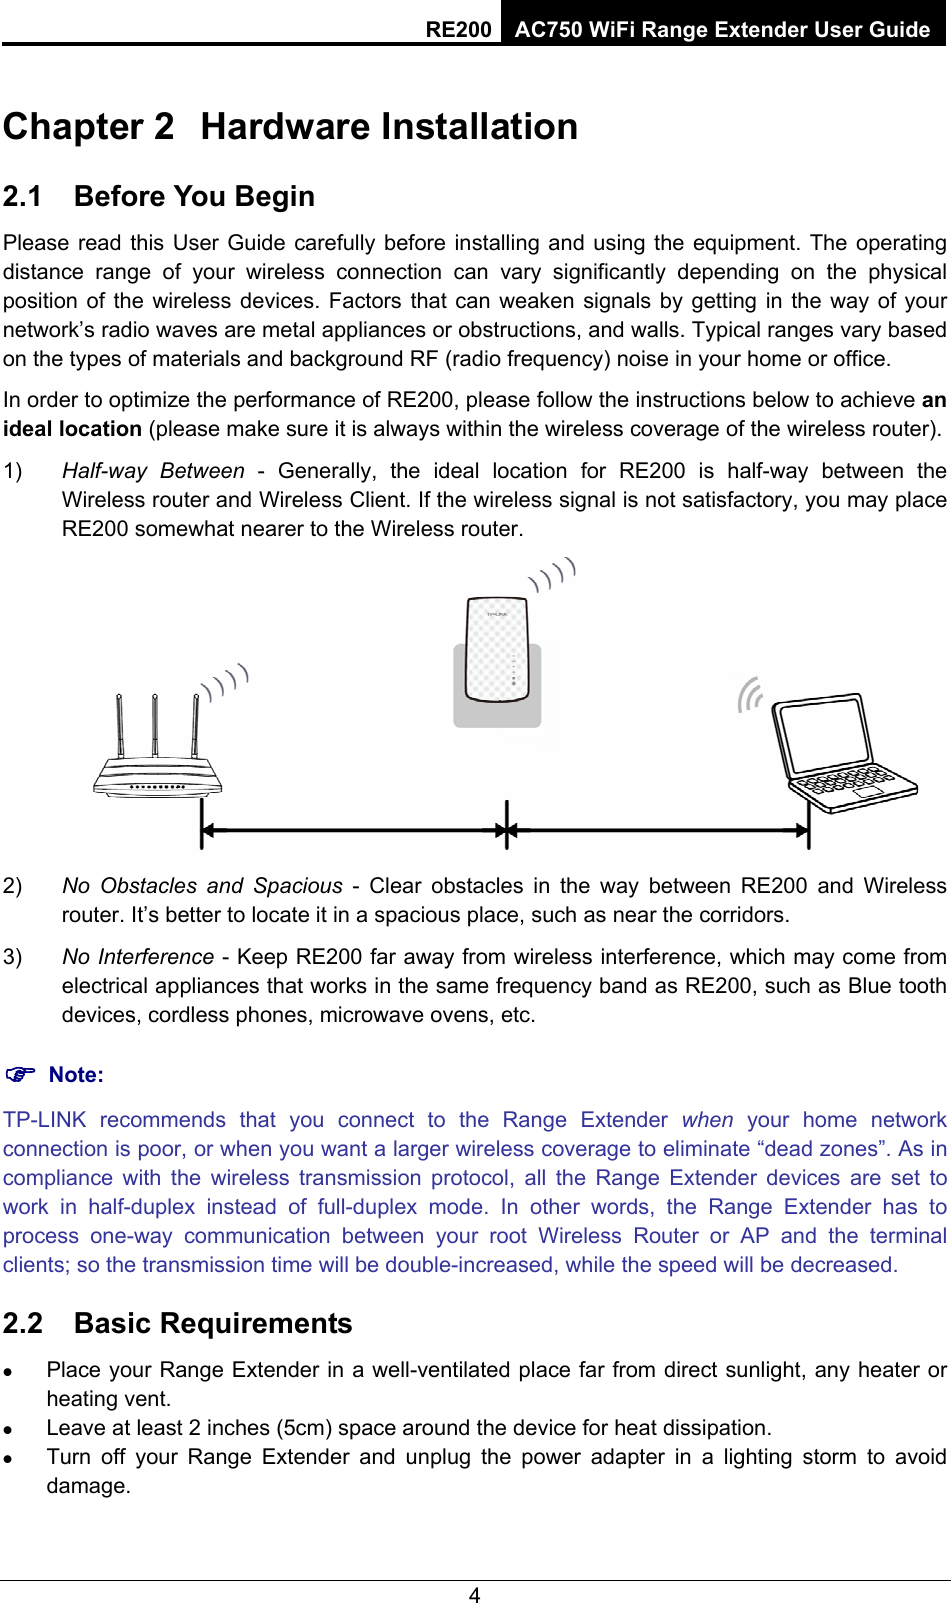 RE200 AC750 WiFi Range Extender User Guide Chapter 2  Hardware Installation 2.1  Before You Begin Please read this User Guide carefully before installing and using the equipment. The operating distance range of your wireless connection can vary significantly depending on the physical position of the wireless devices. Factors that can weaken signals by getting in the way of your network’s radio waves are metal appliances or obstructions, and walls. Typical ranges vary based on the types of materials and background RF (radio frequency) noise in your home or office. In order to optimize the performance of RE200, please follow the instructions below to achieve an ideal location (please make sure it is always within the wireless coverage of the wireless router). 1)  Half-way Between - Generally, the ideal location for RE200 is half-way between the Wireless router and Wireless Client. If the wireless signal is not satisfactory, you may place RE200 somewhat nearer to the Wireless router.  2)  No Obstacles and Spacious - Clear obstacles in the way between RE200 and Wireless router. It’s better to locate it in a spacious place, such as near the corridors.   3)  No Interference - Keep RE200 far away from wireless interference, which may come from electrical appliances that works in the same frequency band as RE200, such as Blue tooth devices, cordless phones, microwave ovens, etc. ) Note: TP-LINK recommends that you connect to the Range Extender when your home network connection is poor, or when you want a larger wireless coverage to eliminate “dead zones”. As in compliance with the wireless transmission protocol, all the Range Extender devices are set to work in half-duplex instead of full-duplex mode. In other words, the Range Extender has to process one-way communication between your root Wireless Router or AP and the terminal clients; so the transmission time will be double-increased, while the speed will be decreased.   2.2  Basic Requirements z Place your Range Extender in a well-ventilated place far from direct sunlight, any heater or heating vent. z Leave at least 2 inches (5cm) space around the device for heat dissipation. z Turn off your Range Extender and unplug the power adapter in a lighting storm to avoid damage. 4 